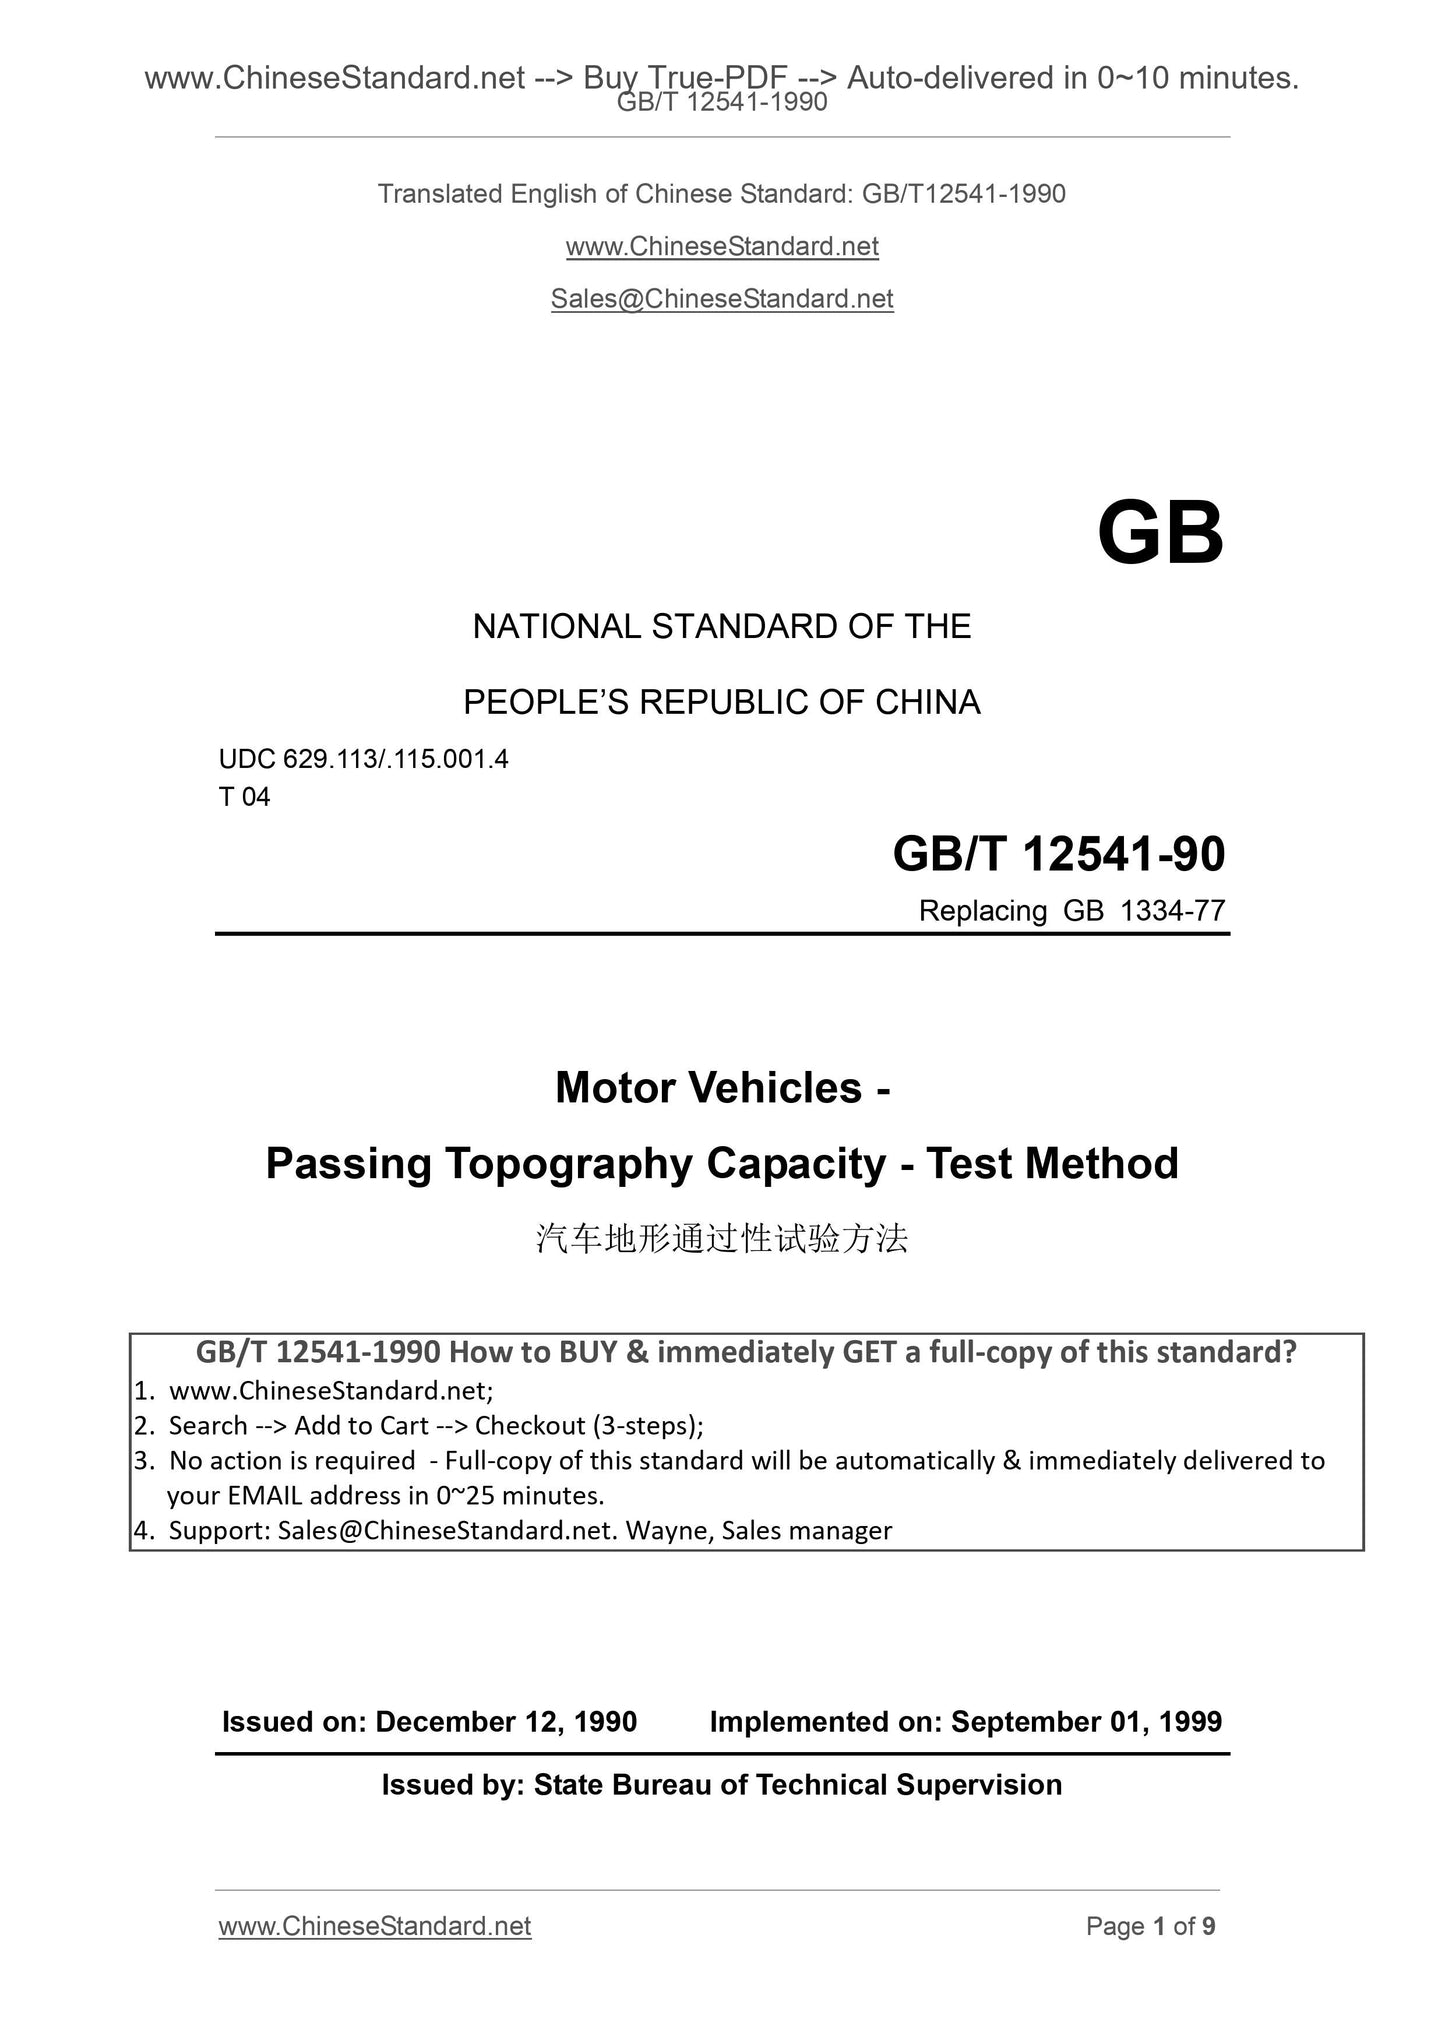 GB/T 12541-1990 Page 1